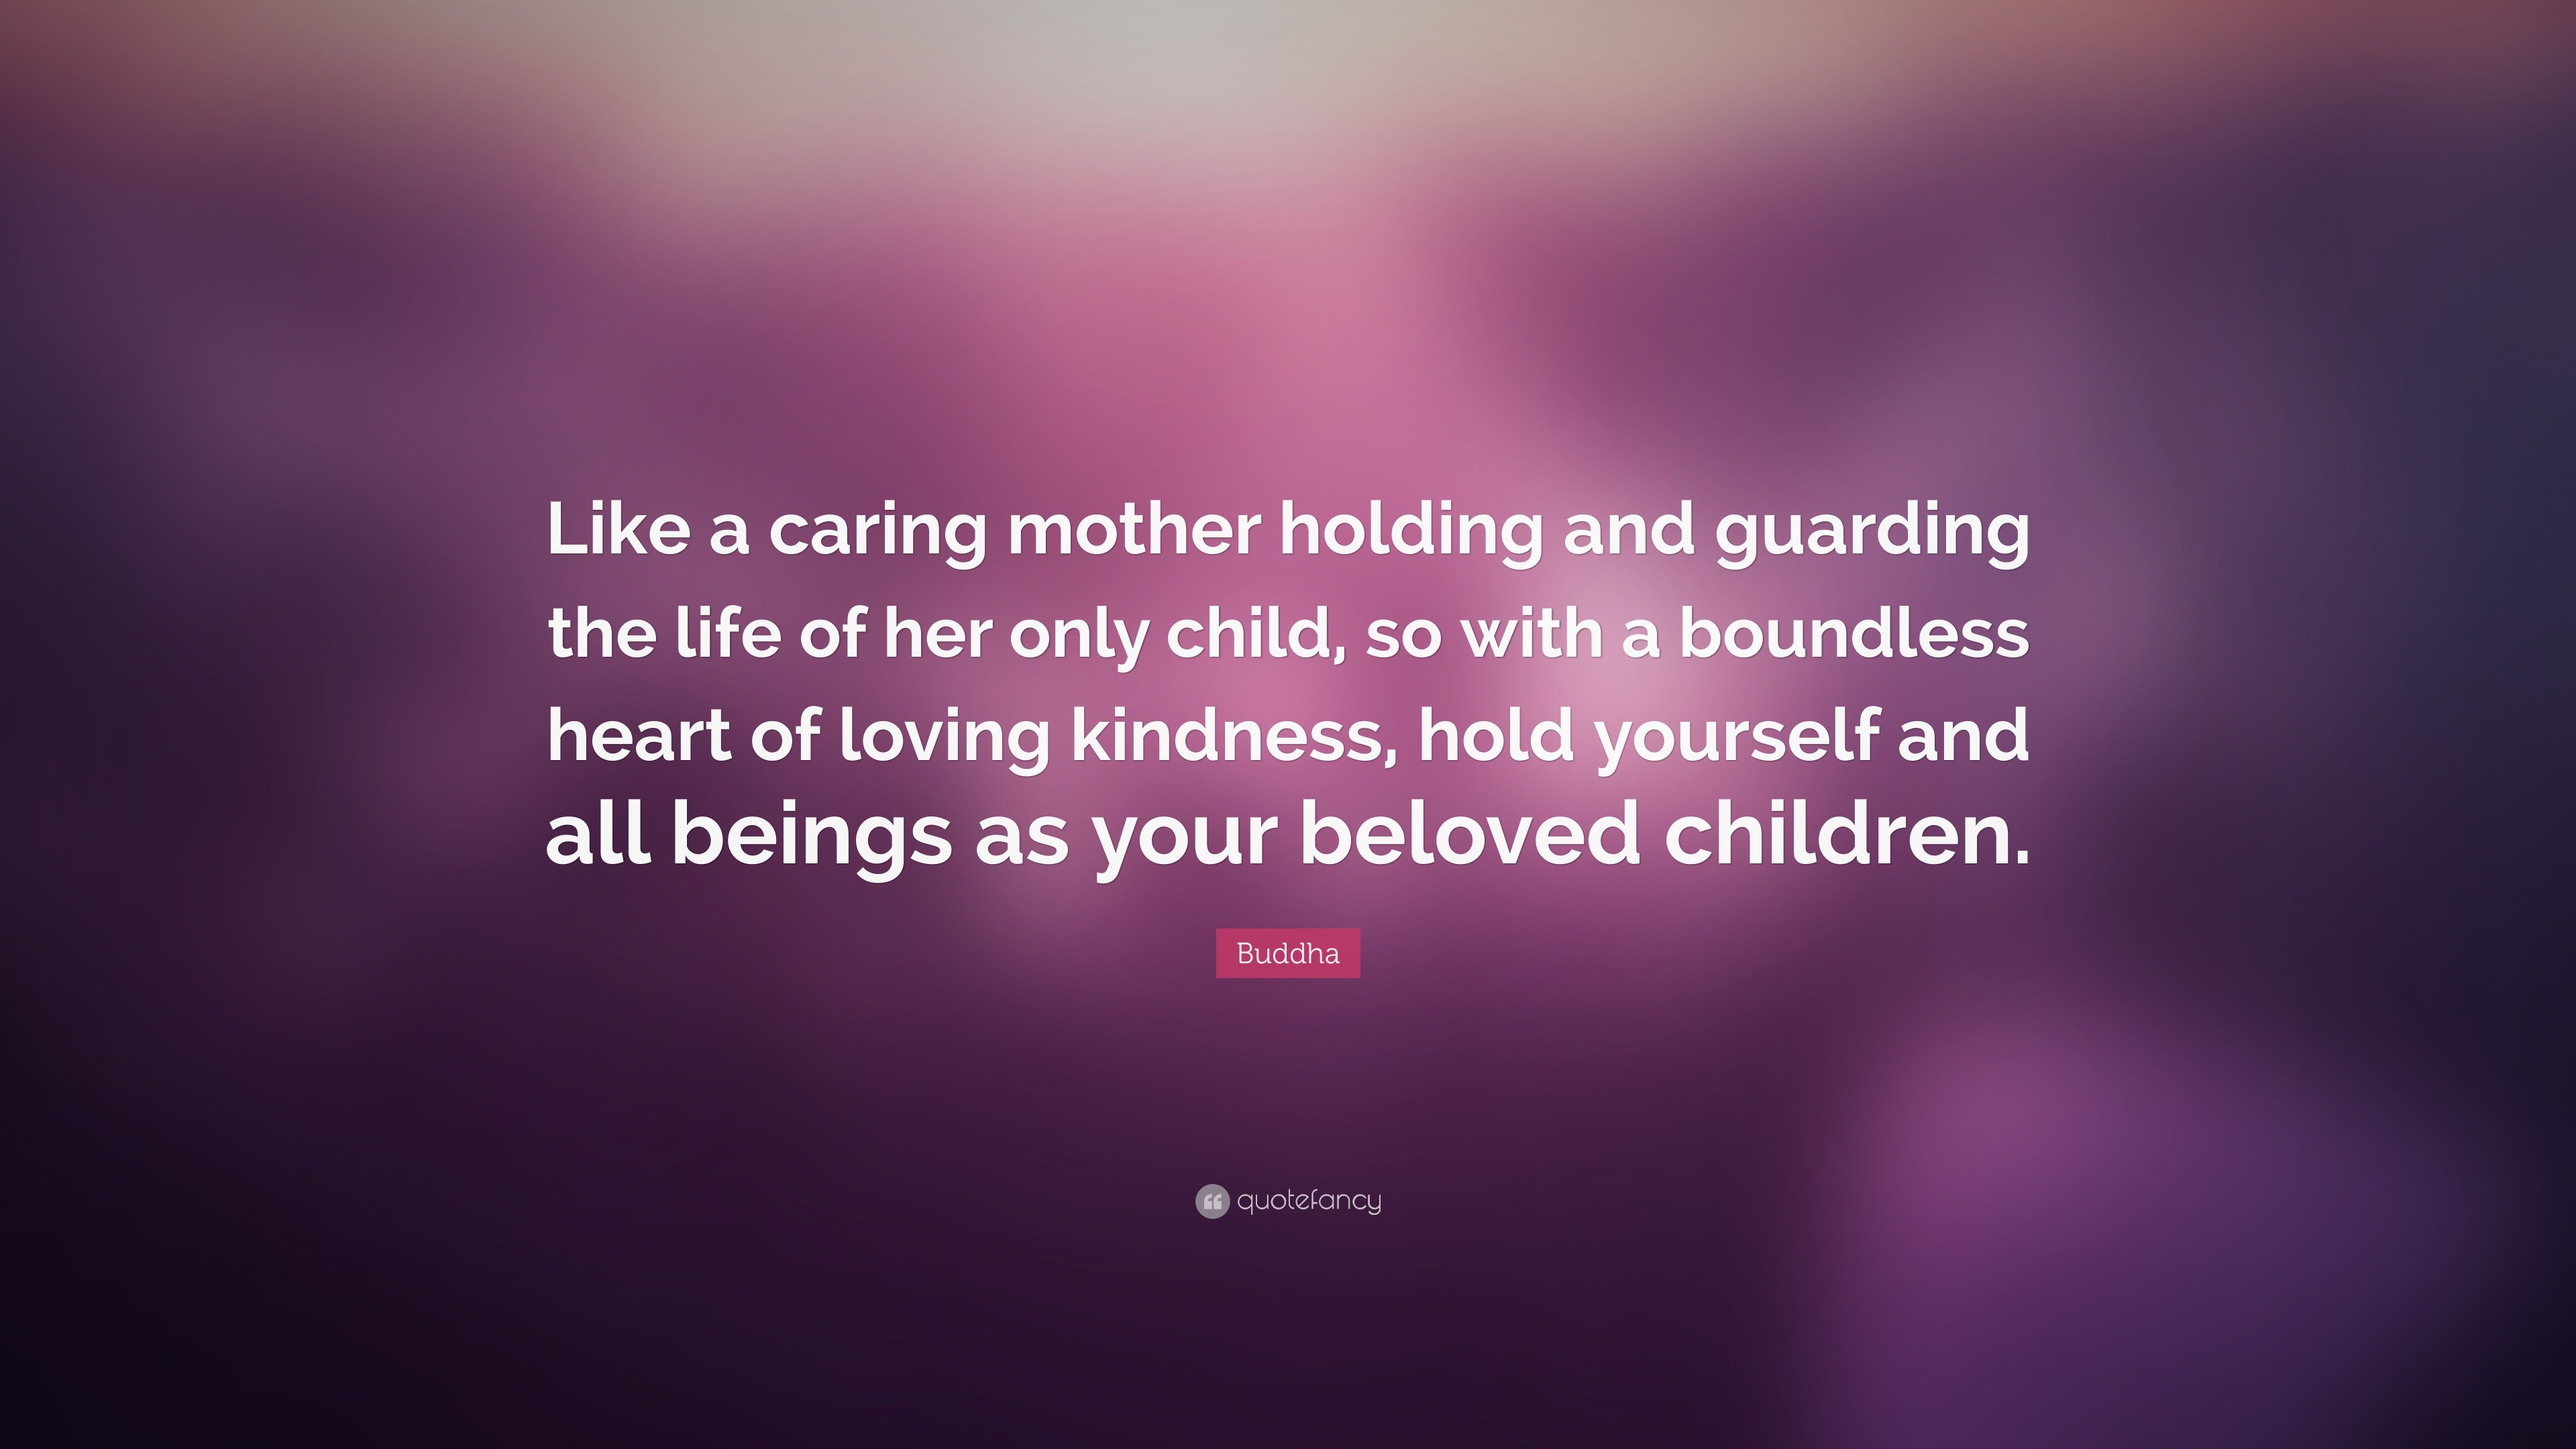 Buddha Quote “Like a caring mother holding and guarding the life of her only